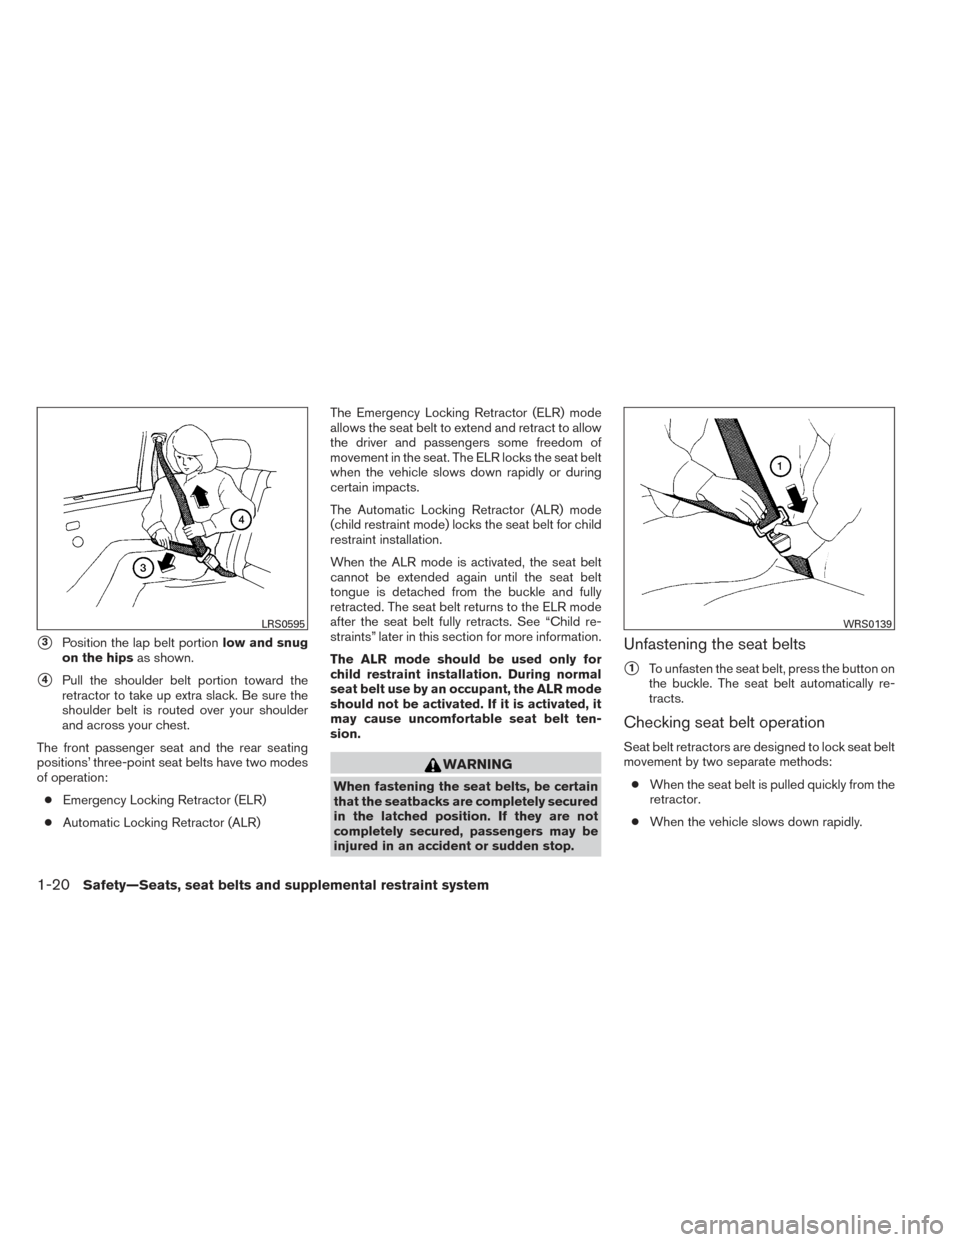 NISSAN ALTIMA 2014 L33 / 5.G Owners Guide 3Position the lap belt portionlow and snug
on the hips as shown.
4Pull the shoulder belt portion toward the
retractor to take up extra slack. Be sure the
shoulder belt is routed over your shoulder
a